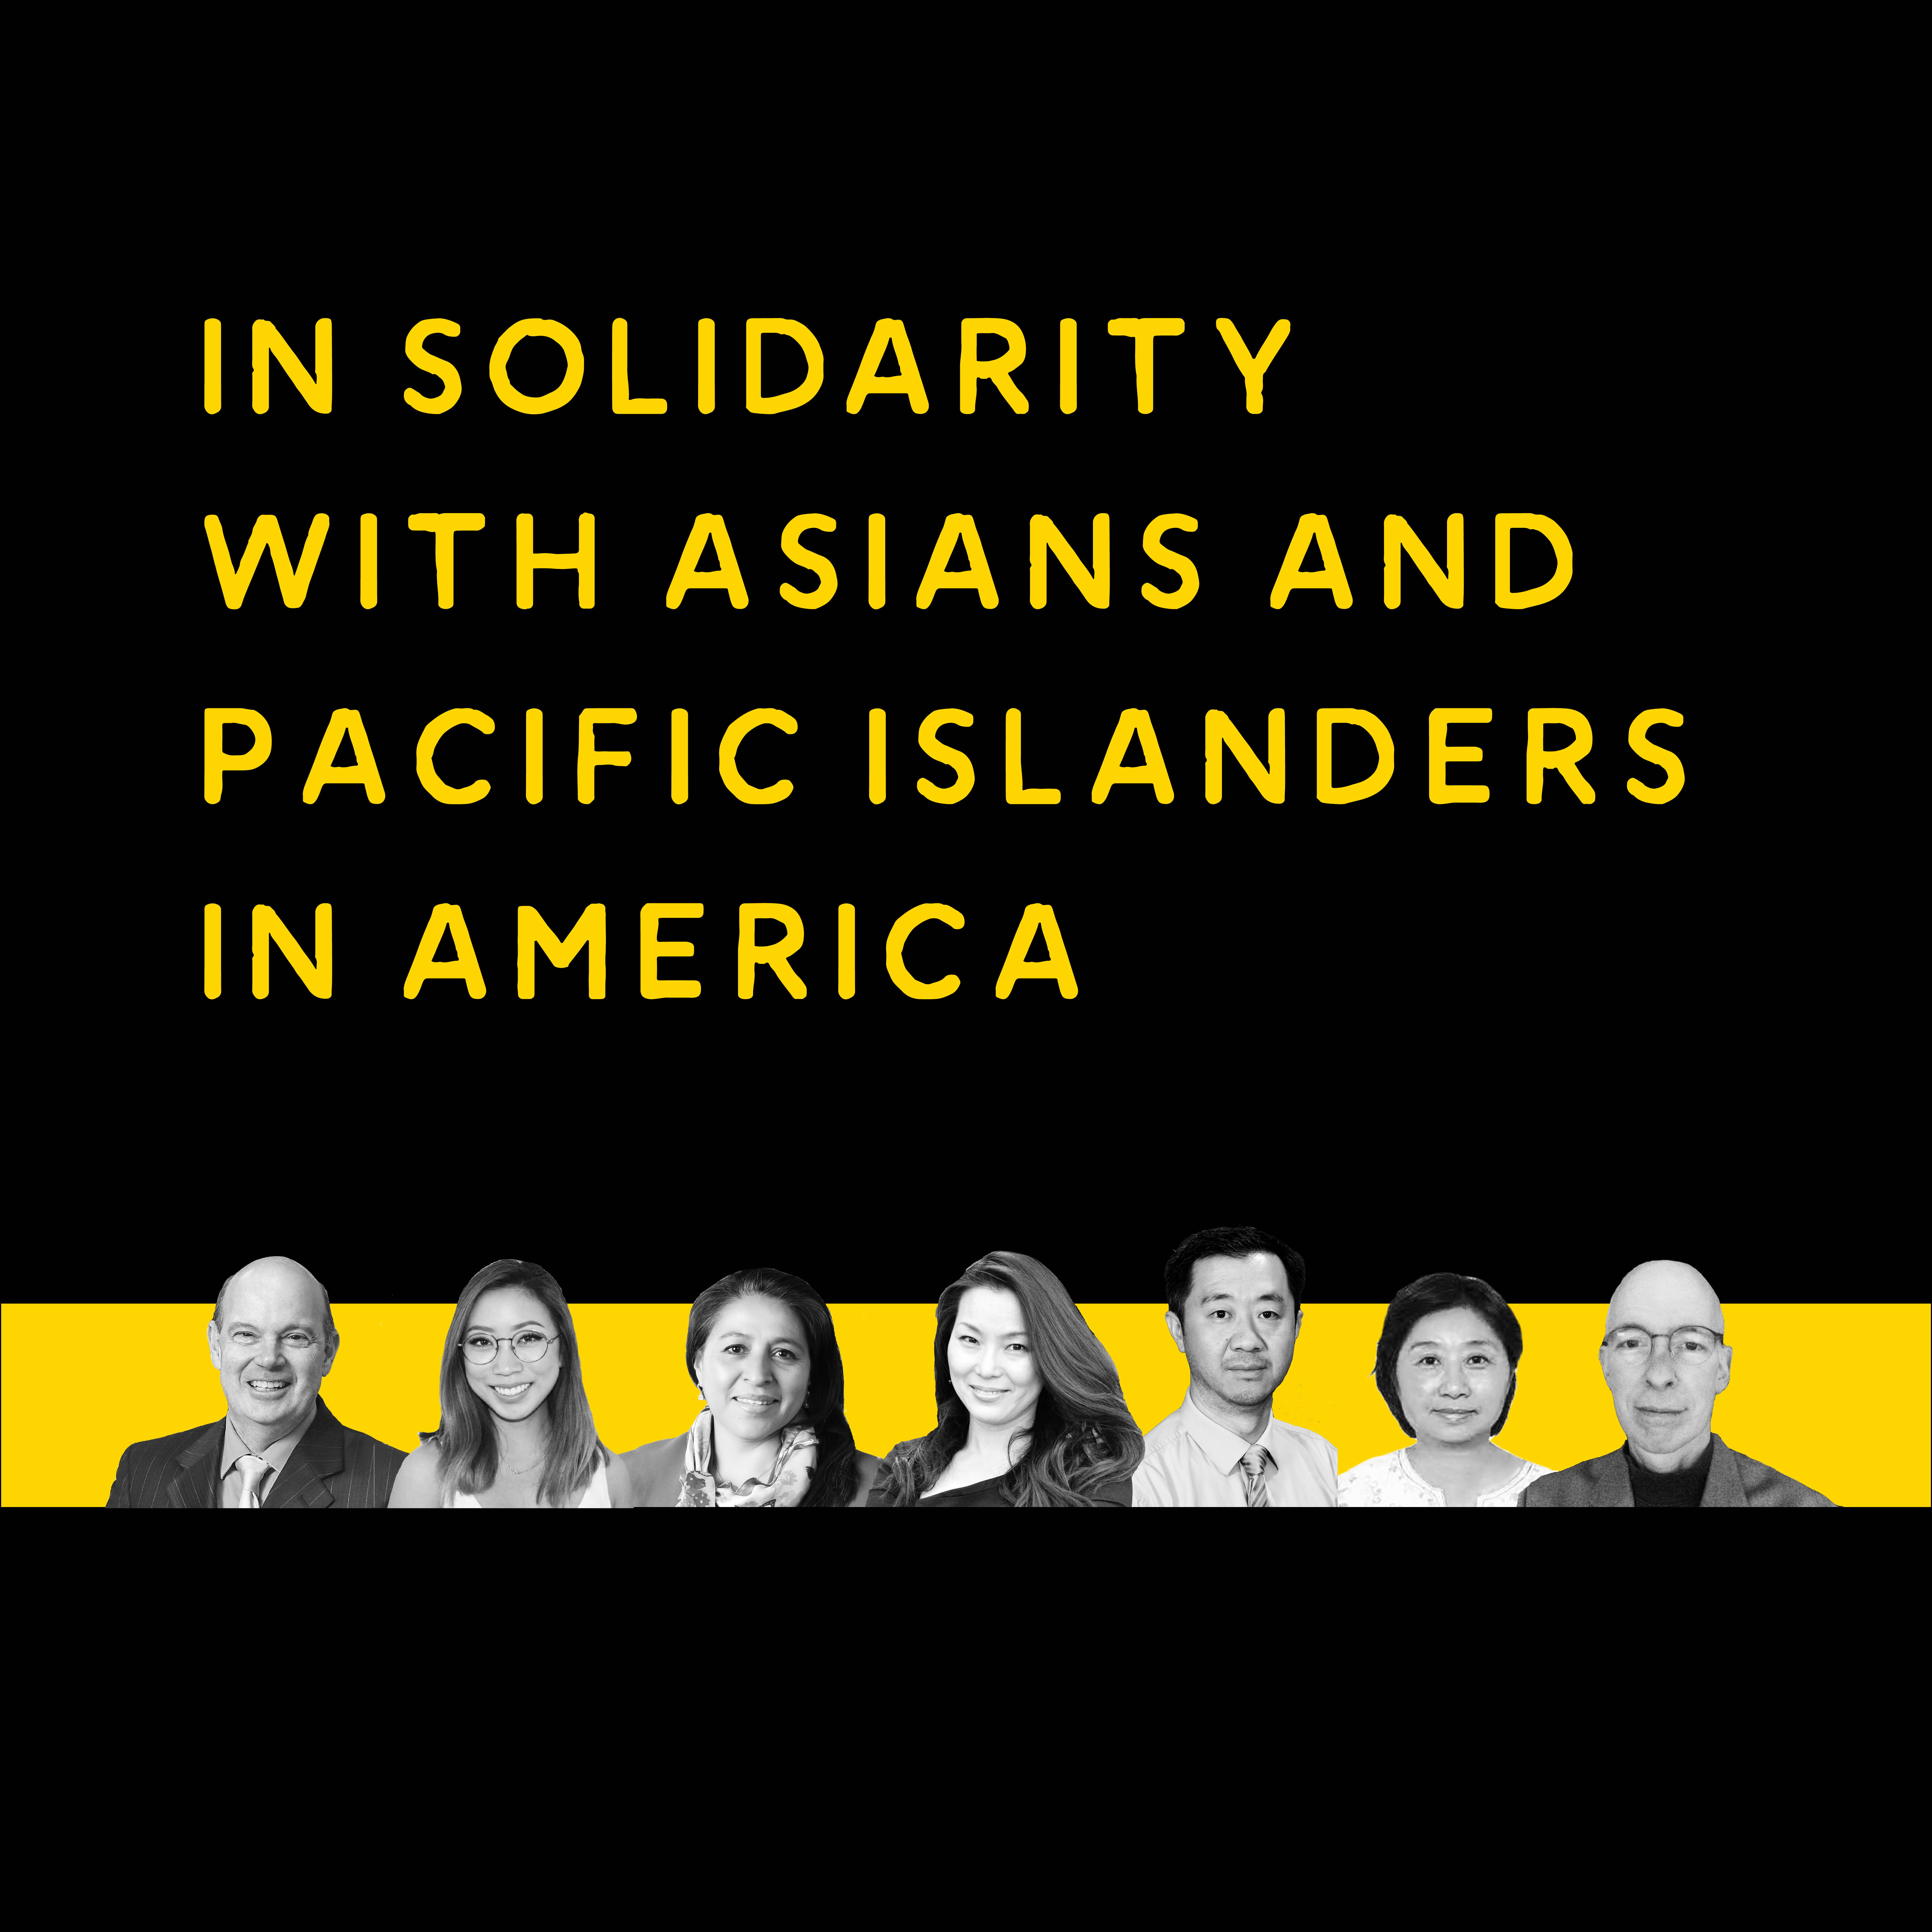 In Solidarity with Asians and Pacific Islanders in America promotional image